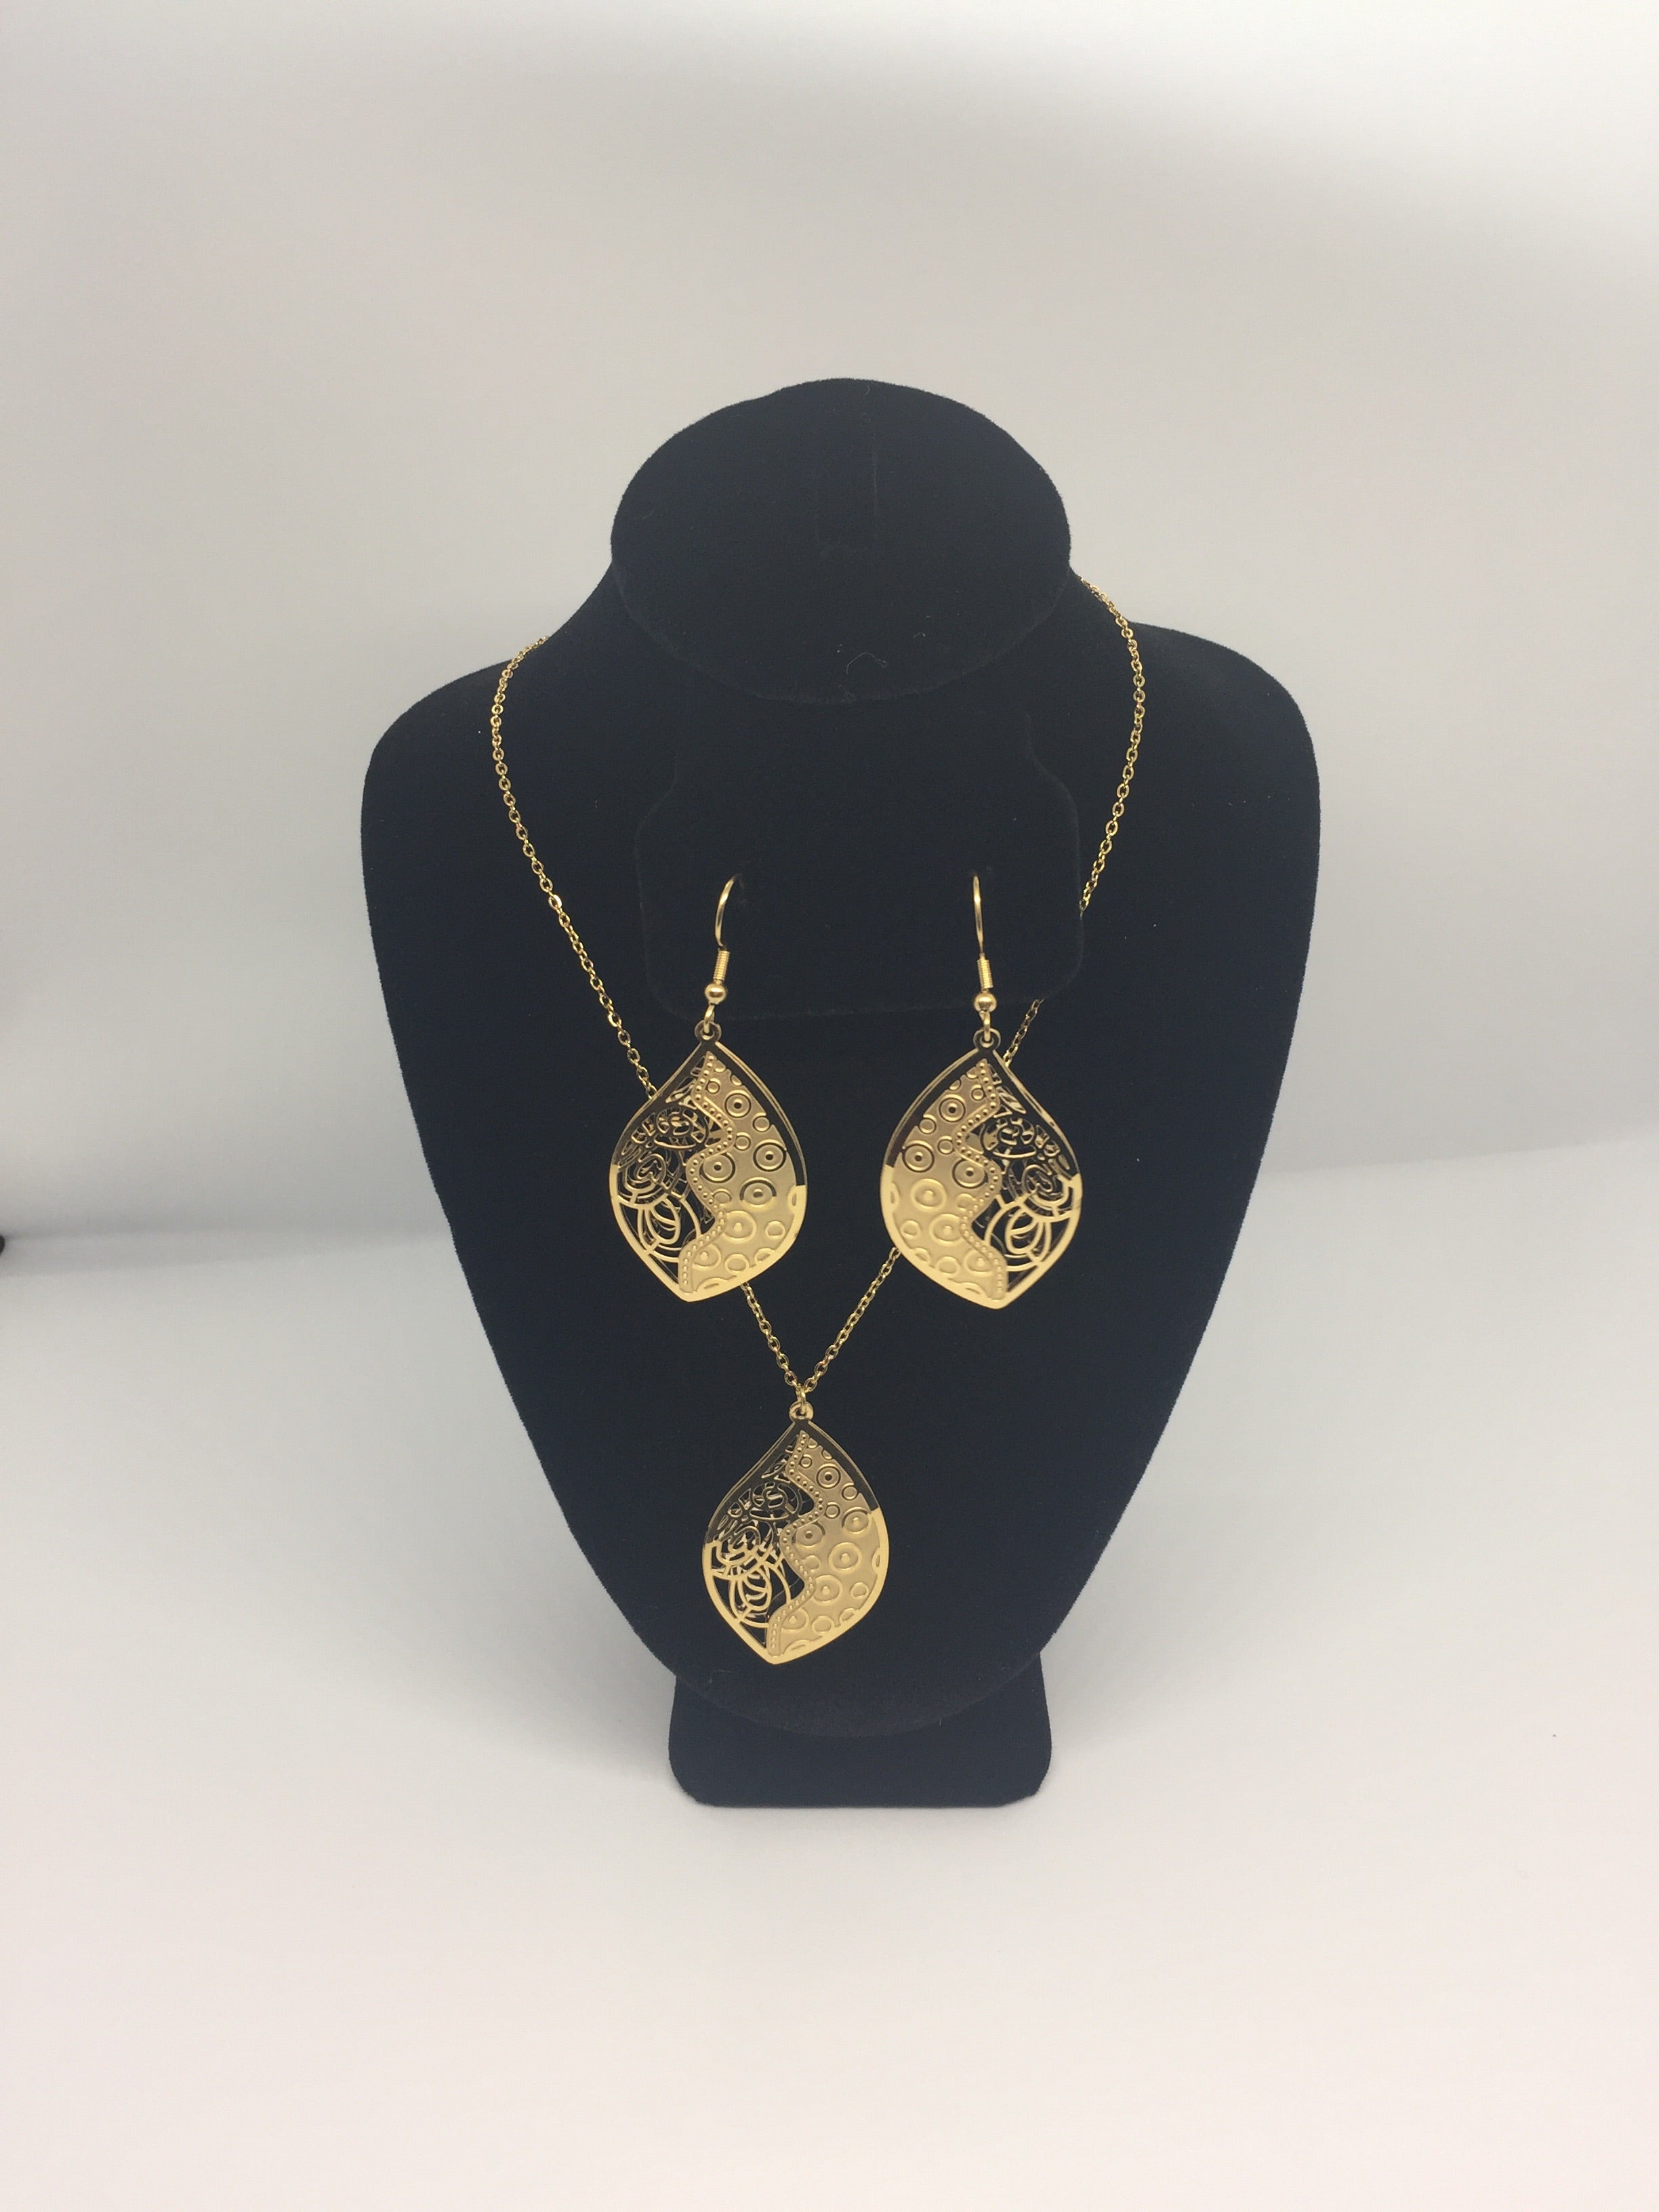 Moroccan style necklace set